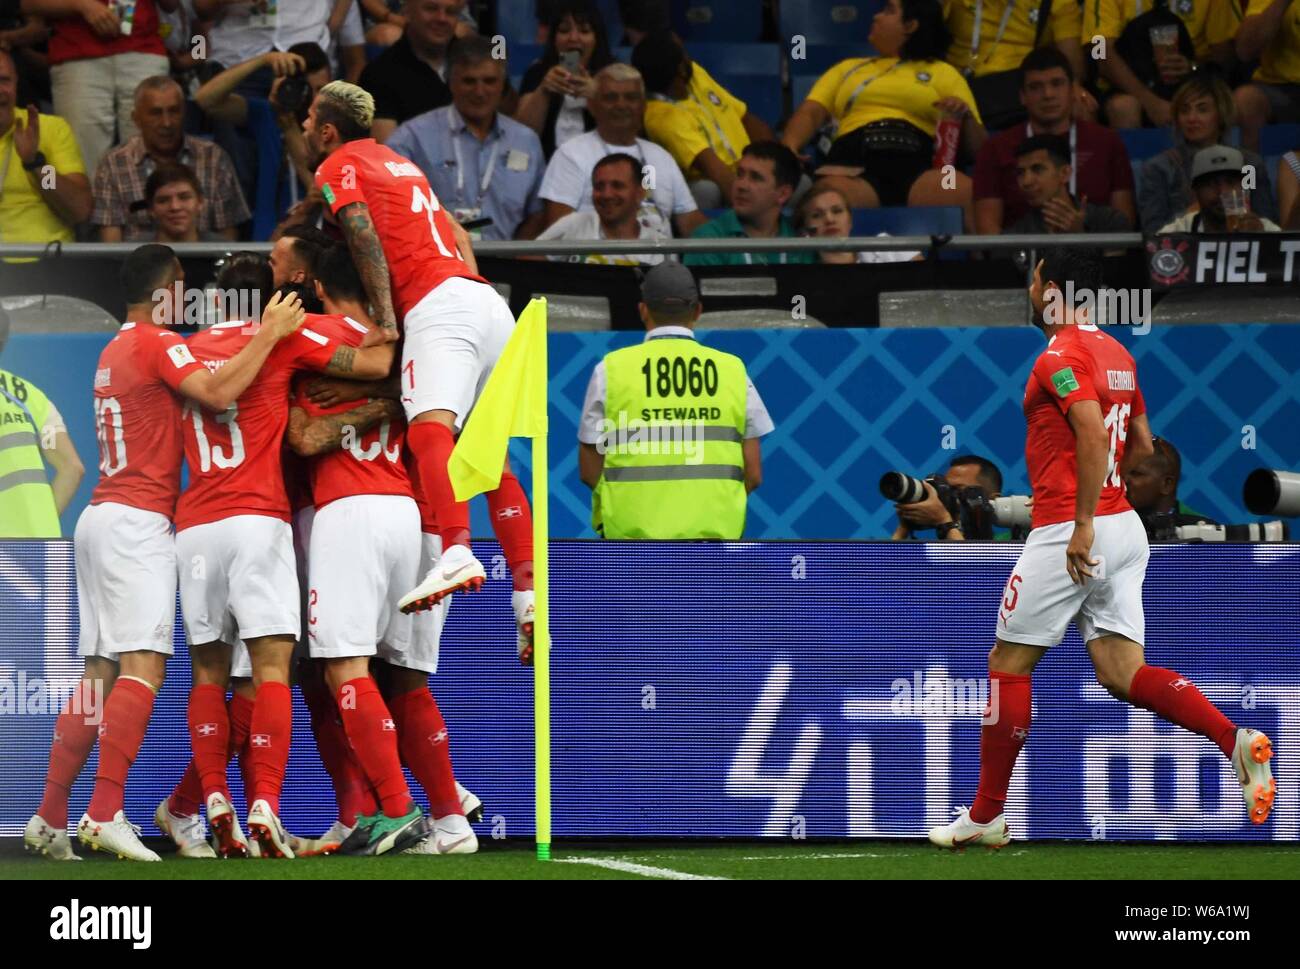 Players of Switzerland celebrate after Steven Zuber scored a goal against Brazil in their Group E match during the 2018 FIFA World Cup in Rostov, Russ Stock Photo